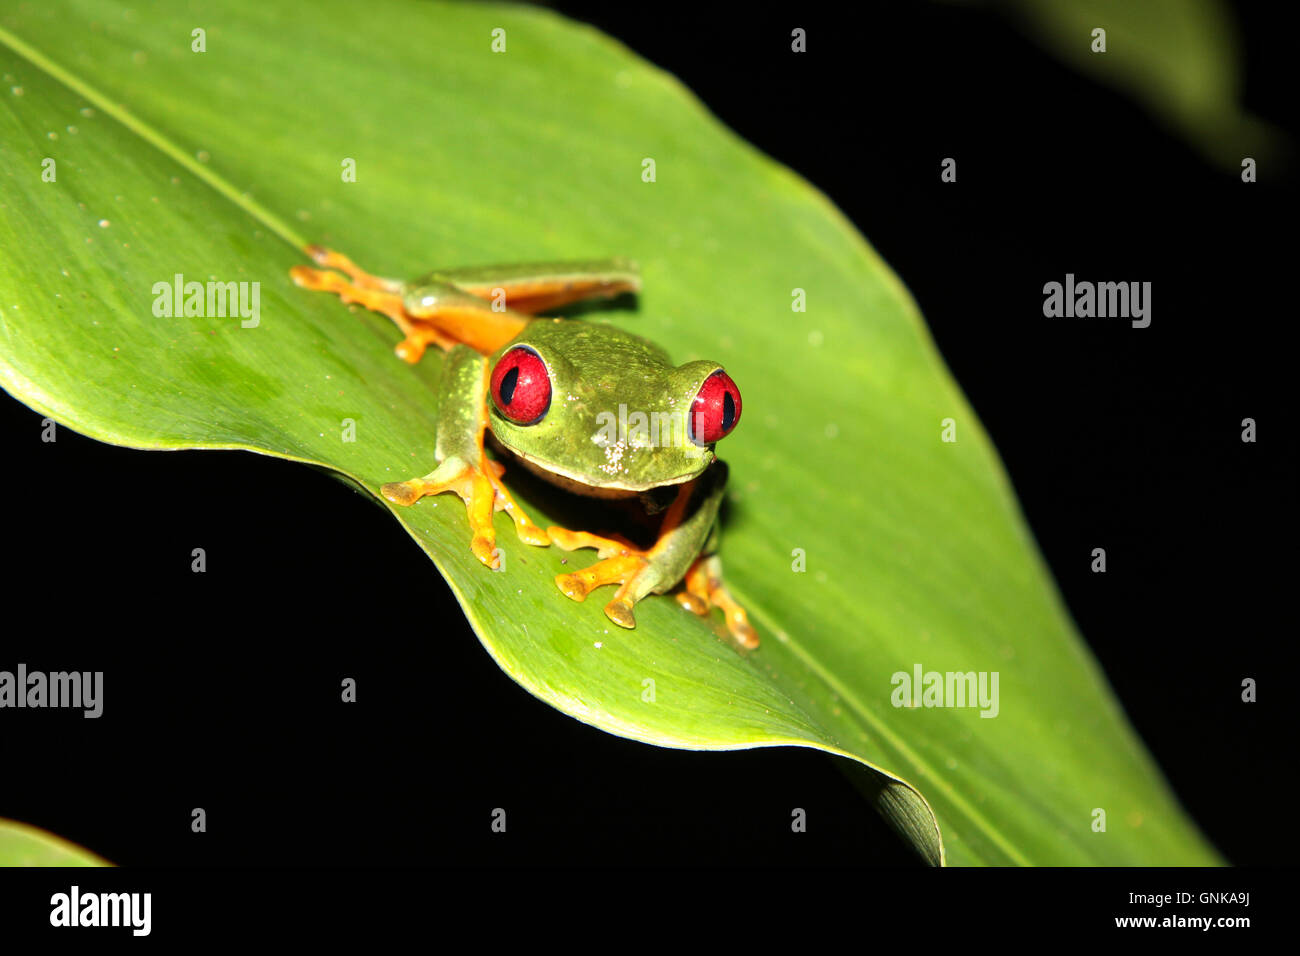 A red eyed tree frog [Agalychnis callidryas] at night. Costa Rica. Stock Photo